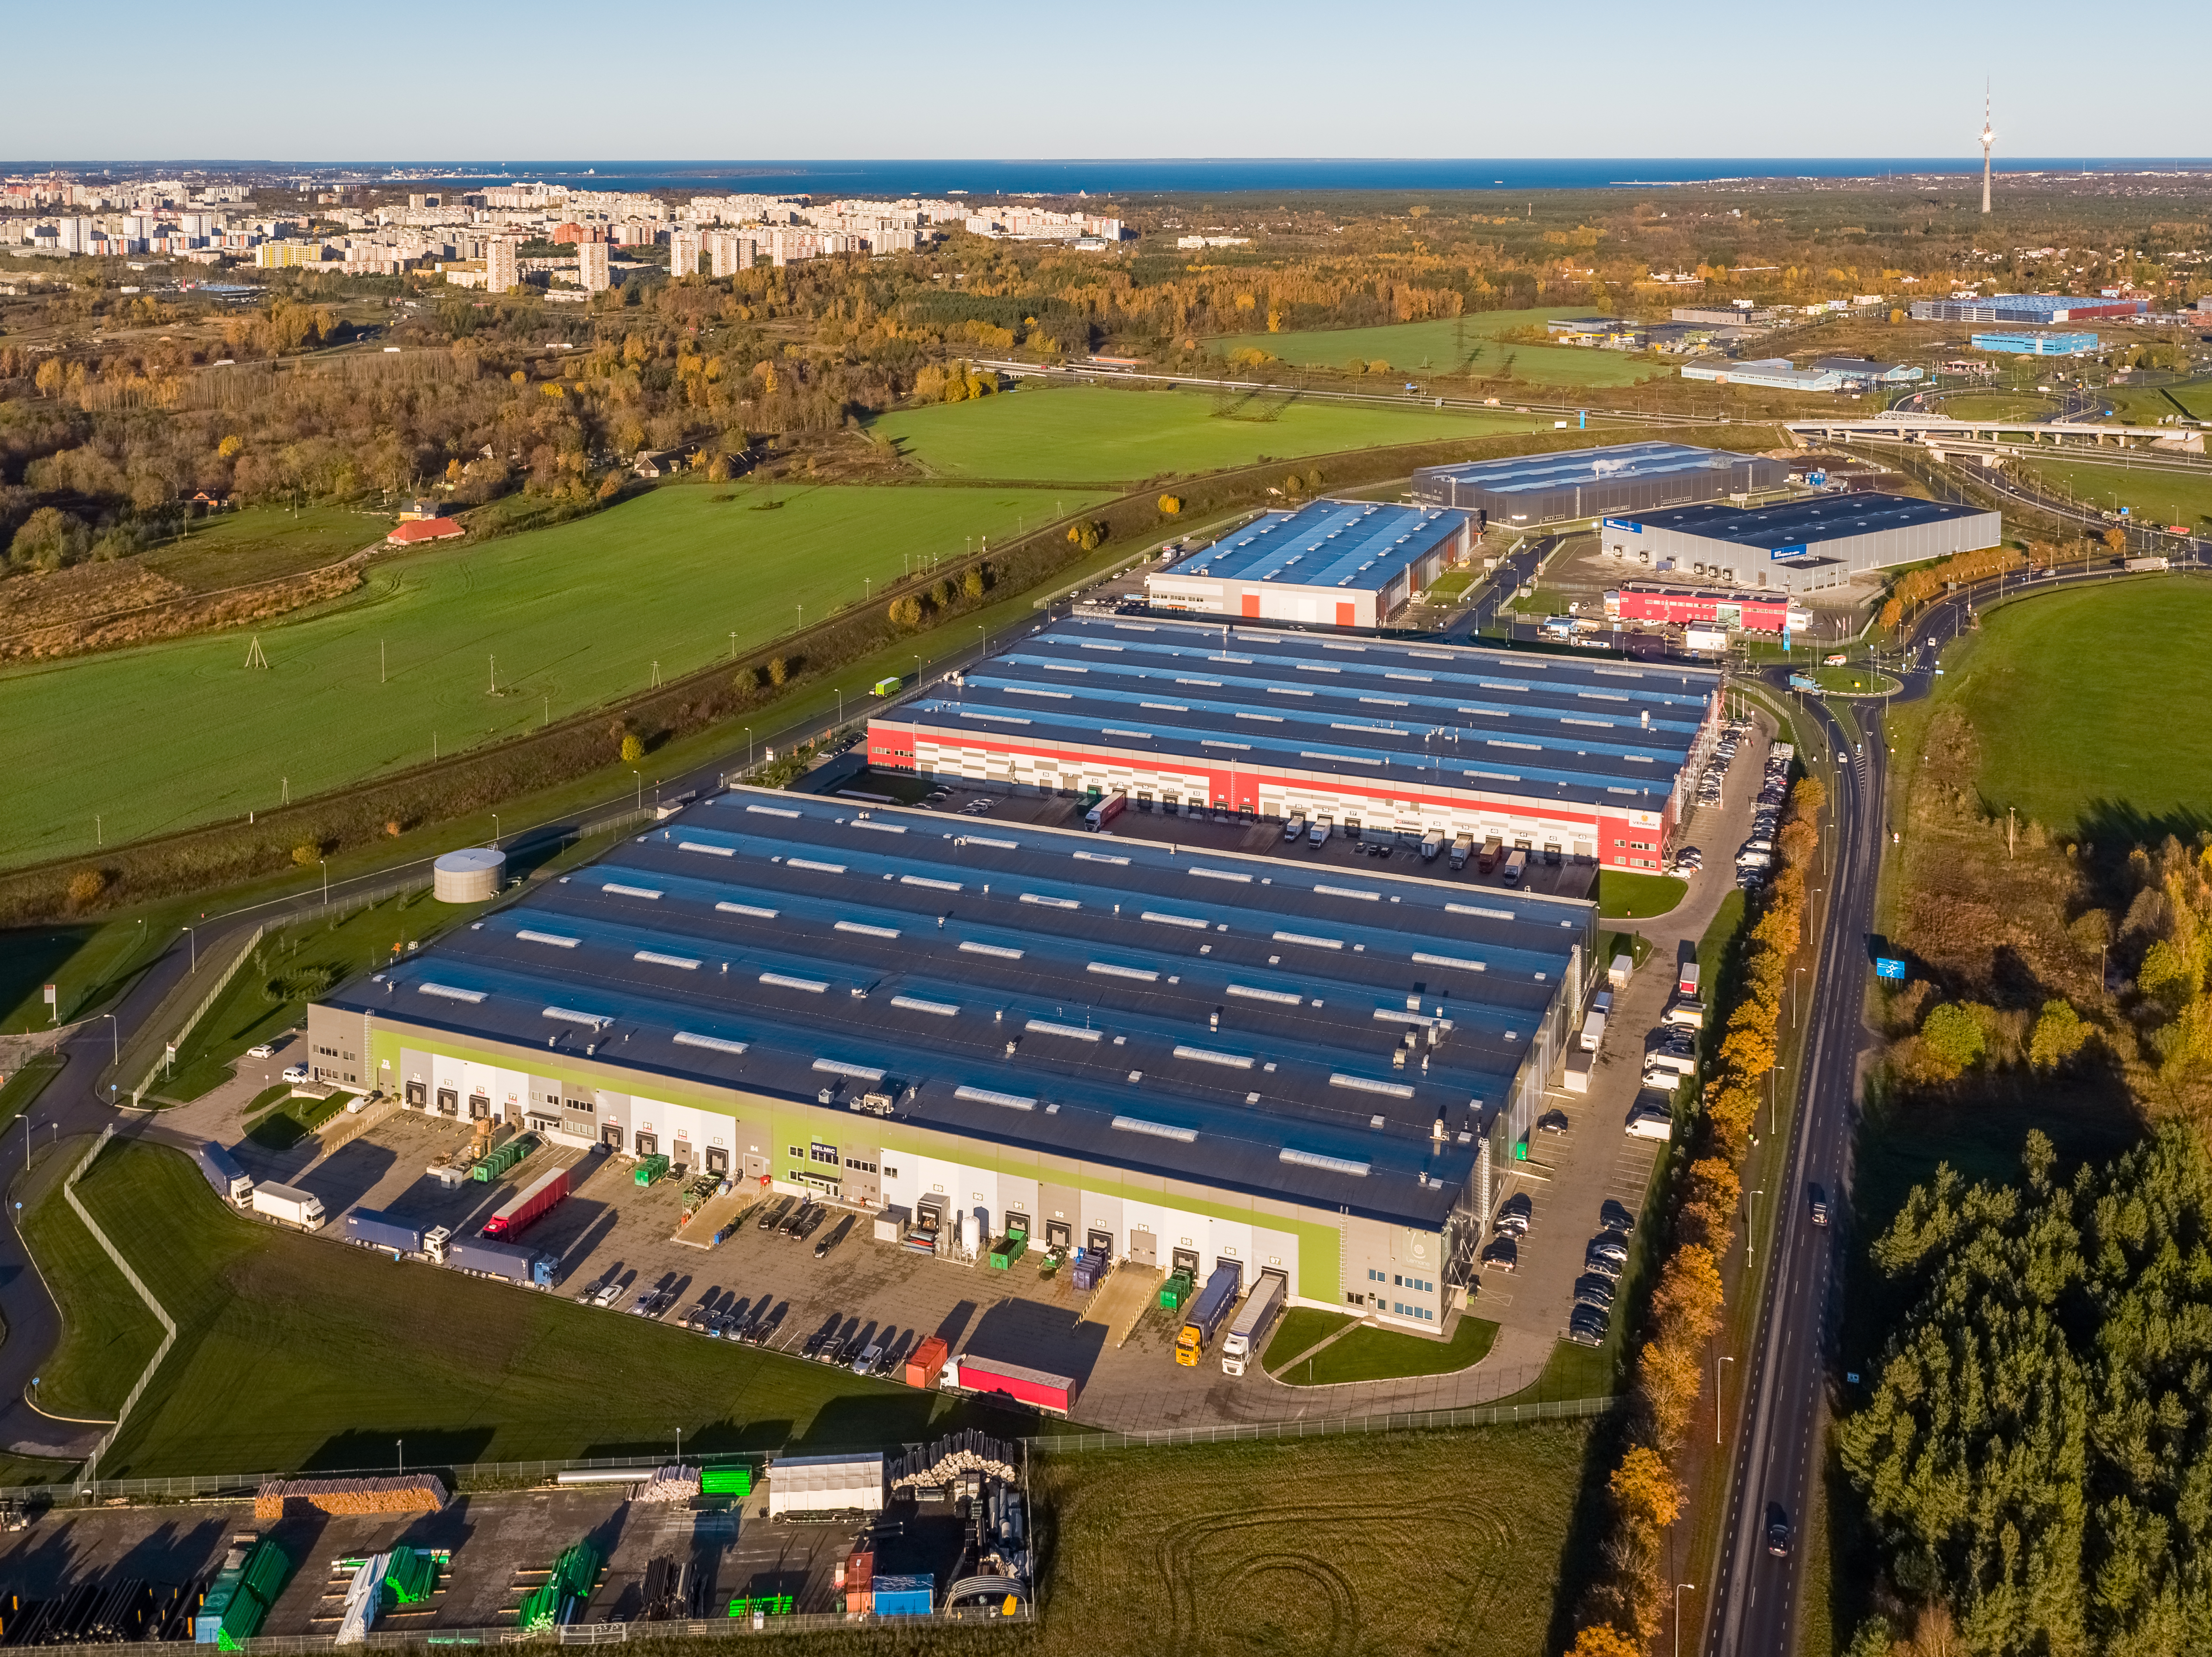 Nehatu Logistics Park in Tallinn, one of our real estate holdings. As e-commerce is taking off, warehouses, logistics centres and distribution depots are in keen demand. The Baltic region’s position as a cost-competitive outsourcing destination is complemented by integrated IT solutions and infrastructure, and its strategic location in northern Europe with access to the Nordics, continental Europe, Russia and Poland.